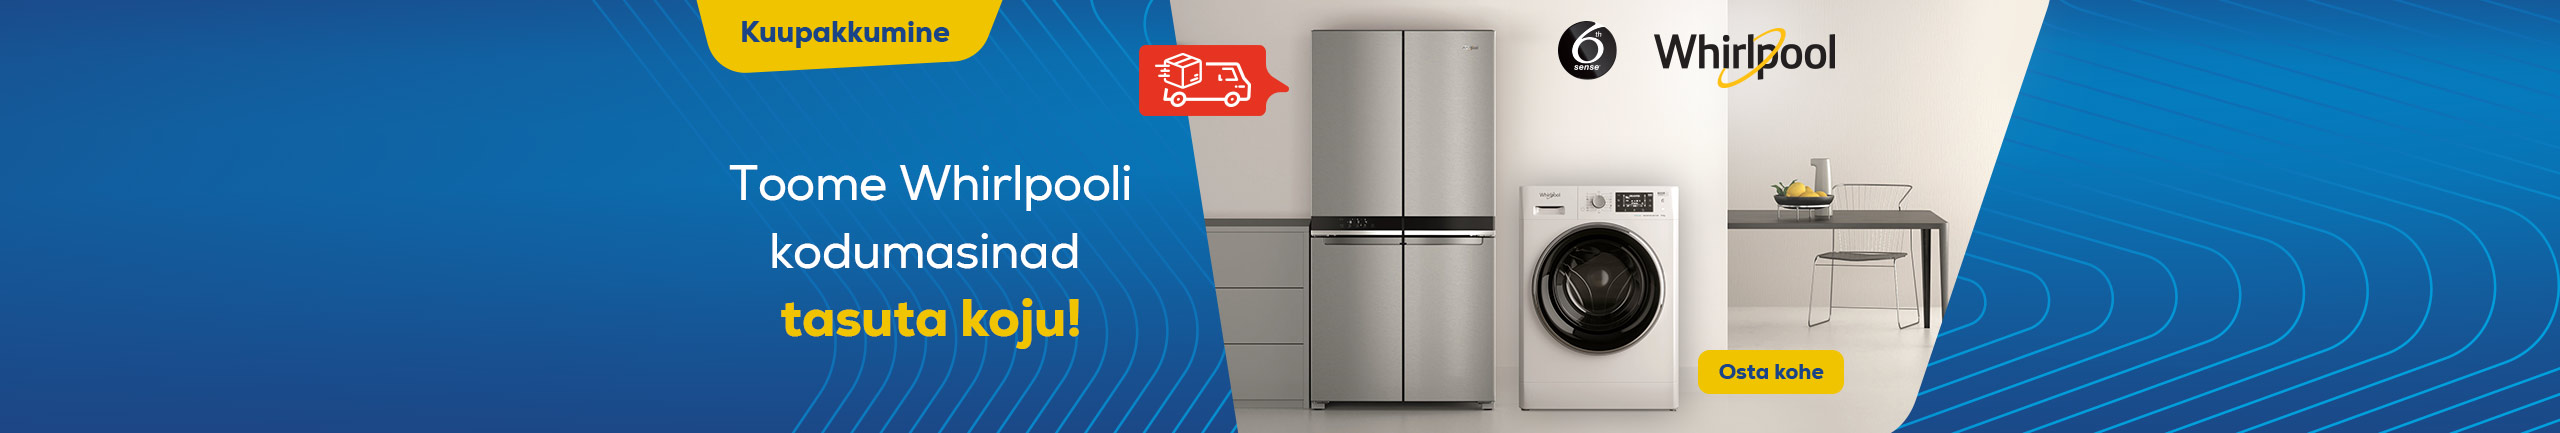 Free delivery for Whirlpool home appliances!